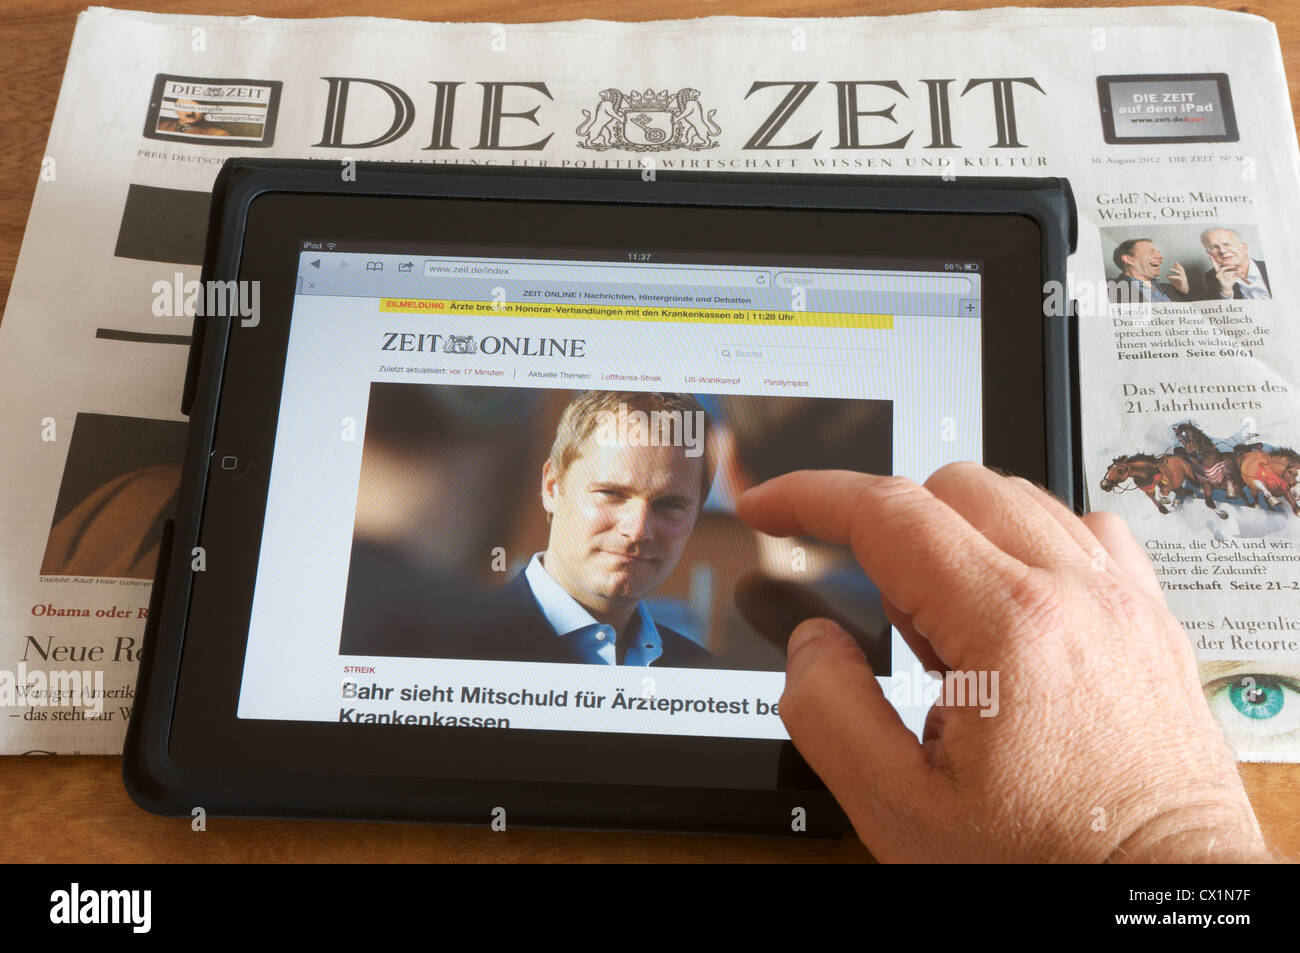 Die Zeit newspaper and electronic version displayed on an Apple iPad tablet computer Stock Photo